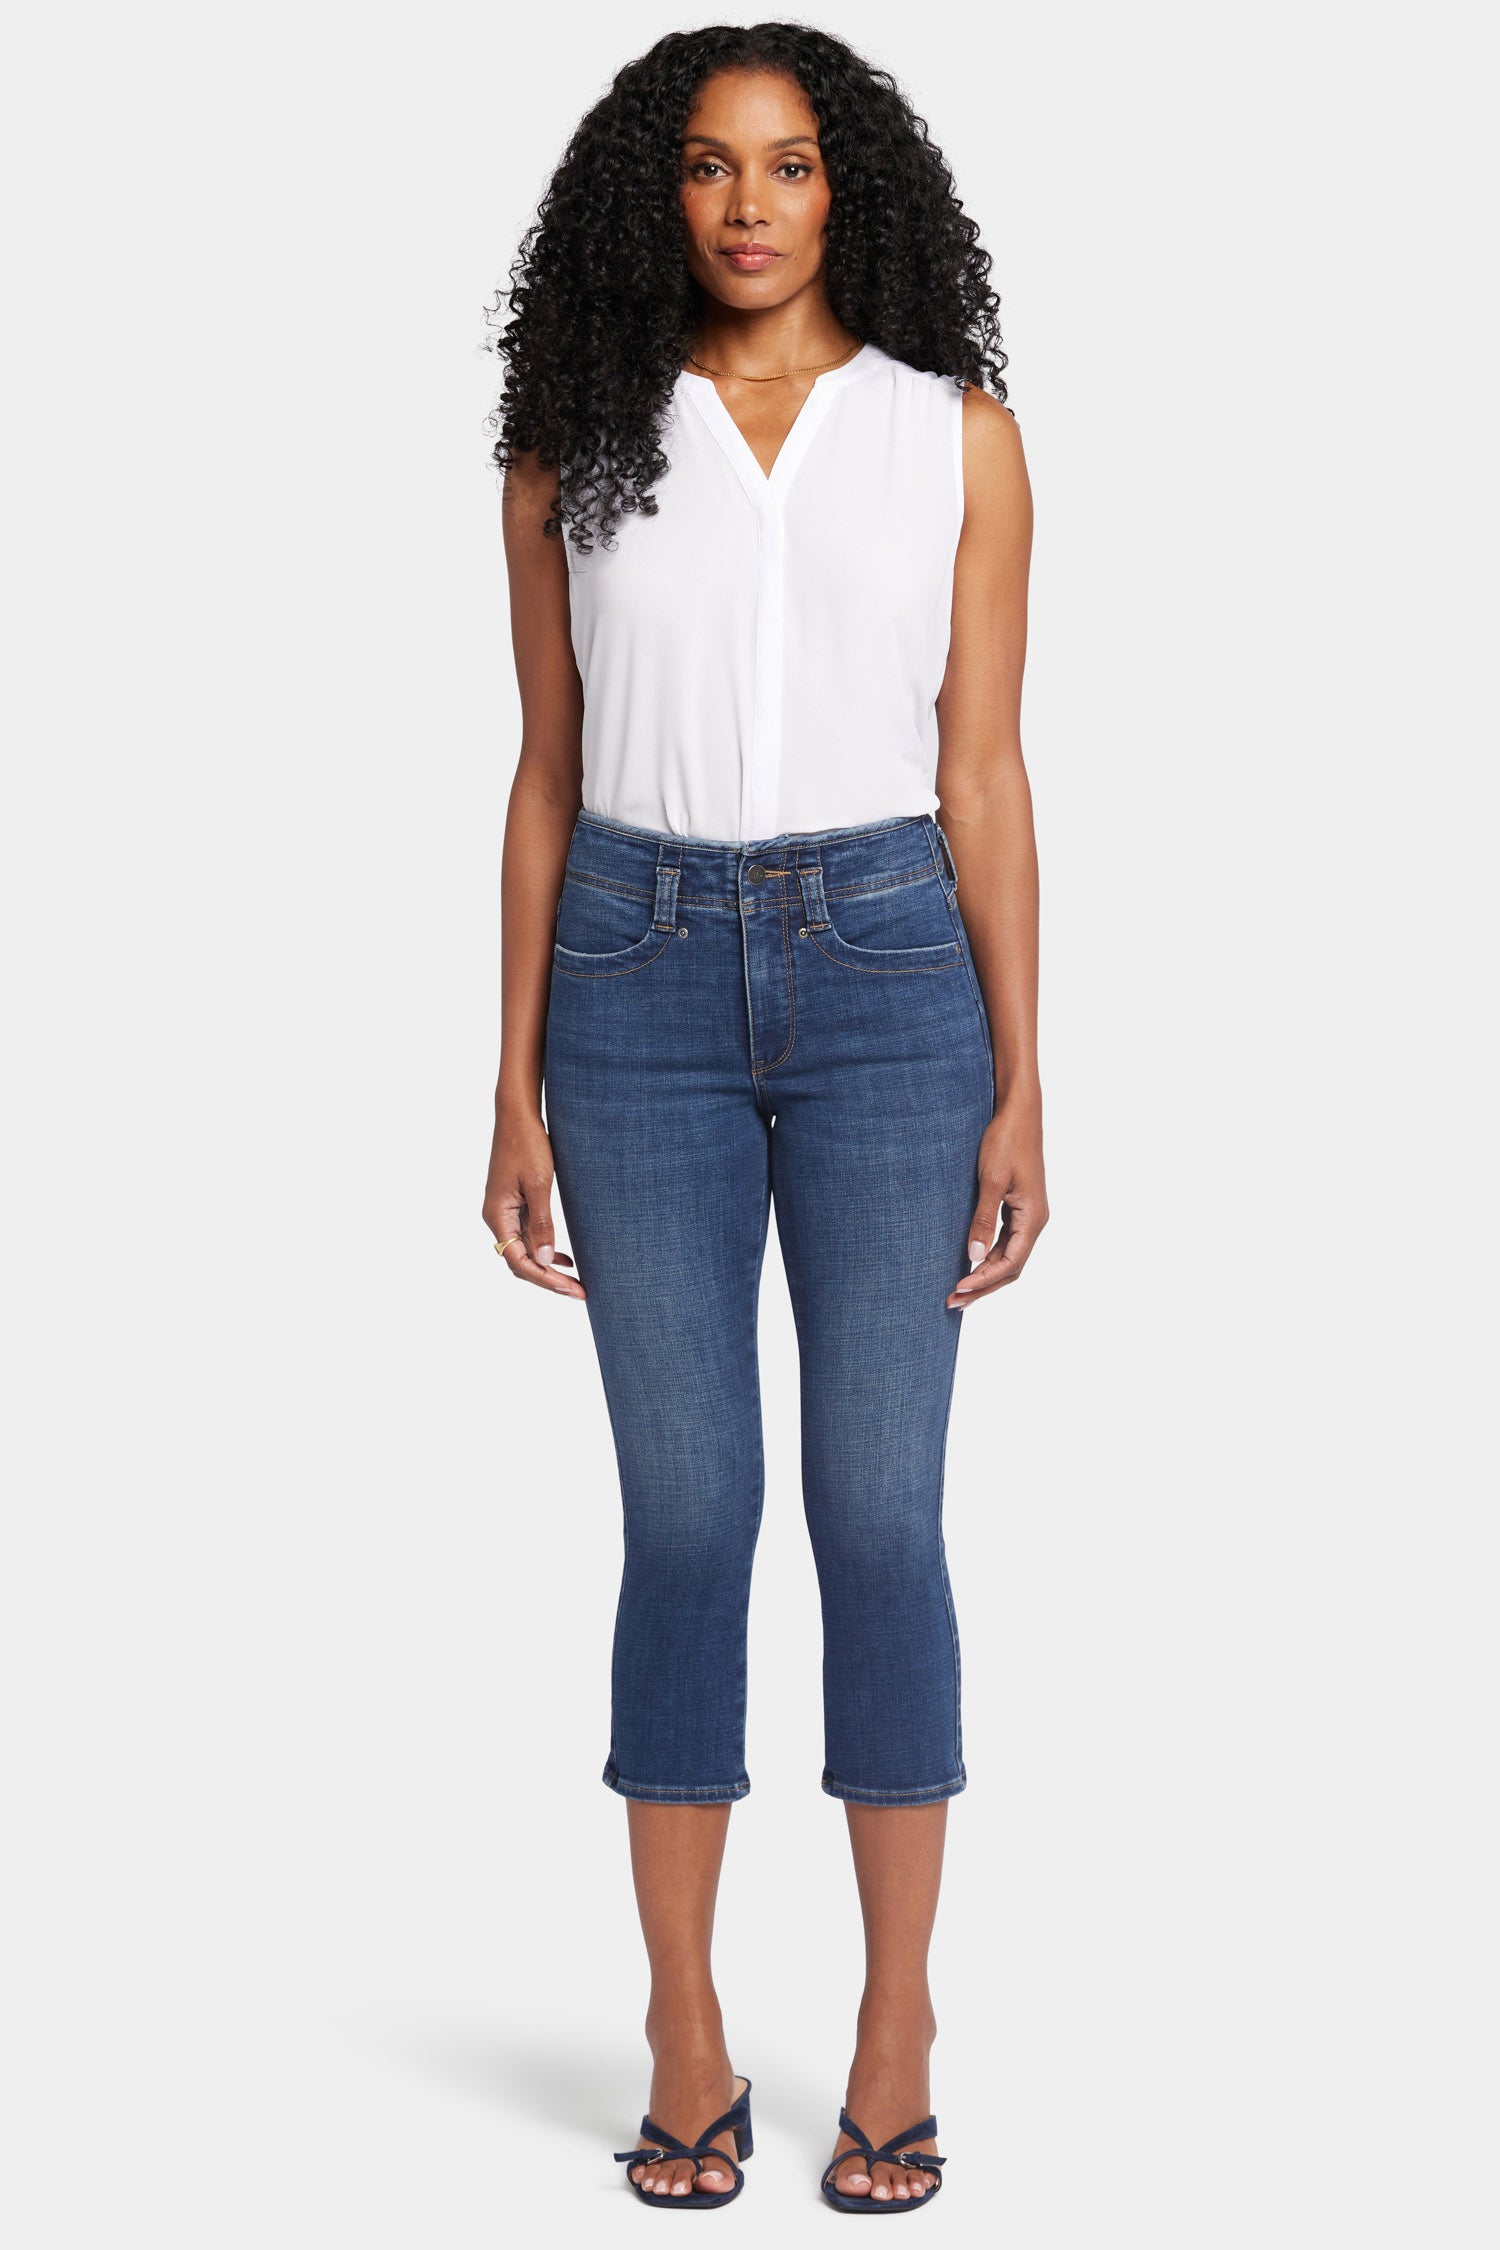 Women's Jeans: Skinny, Boyfriend, Plus Size & More | maurices